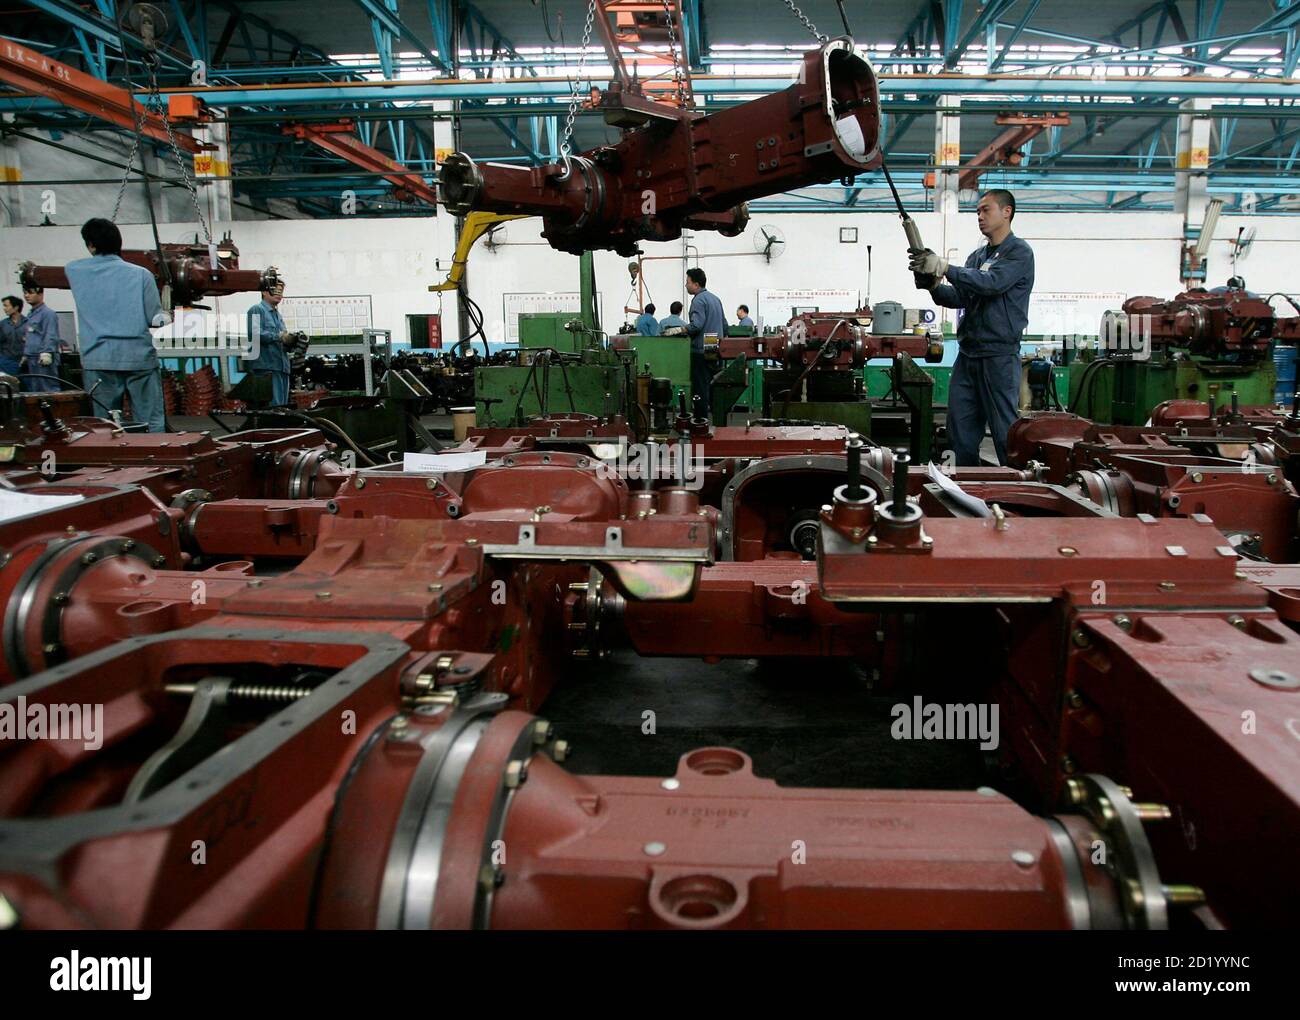 Chinese workers man the assembly line at China Yituo Group tractor factory  in Luoyang city in China's central eastern province of Henan May 12, 2006.  China Yituo Group is one of the